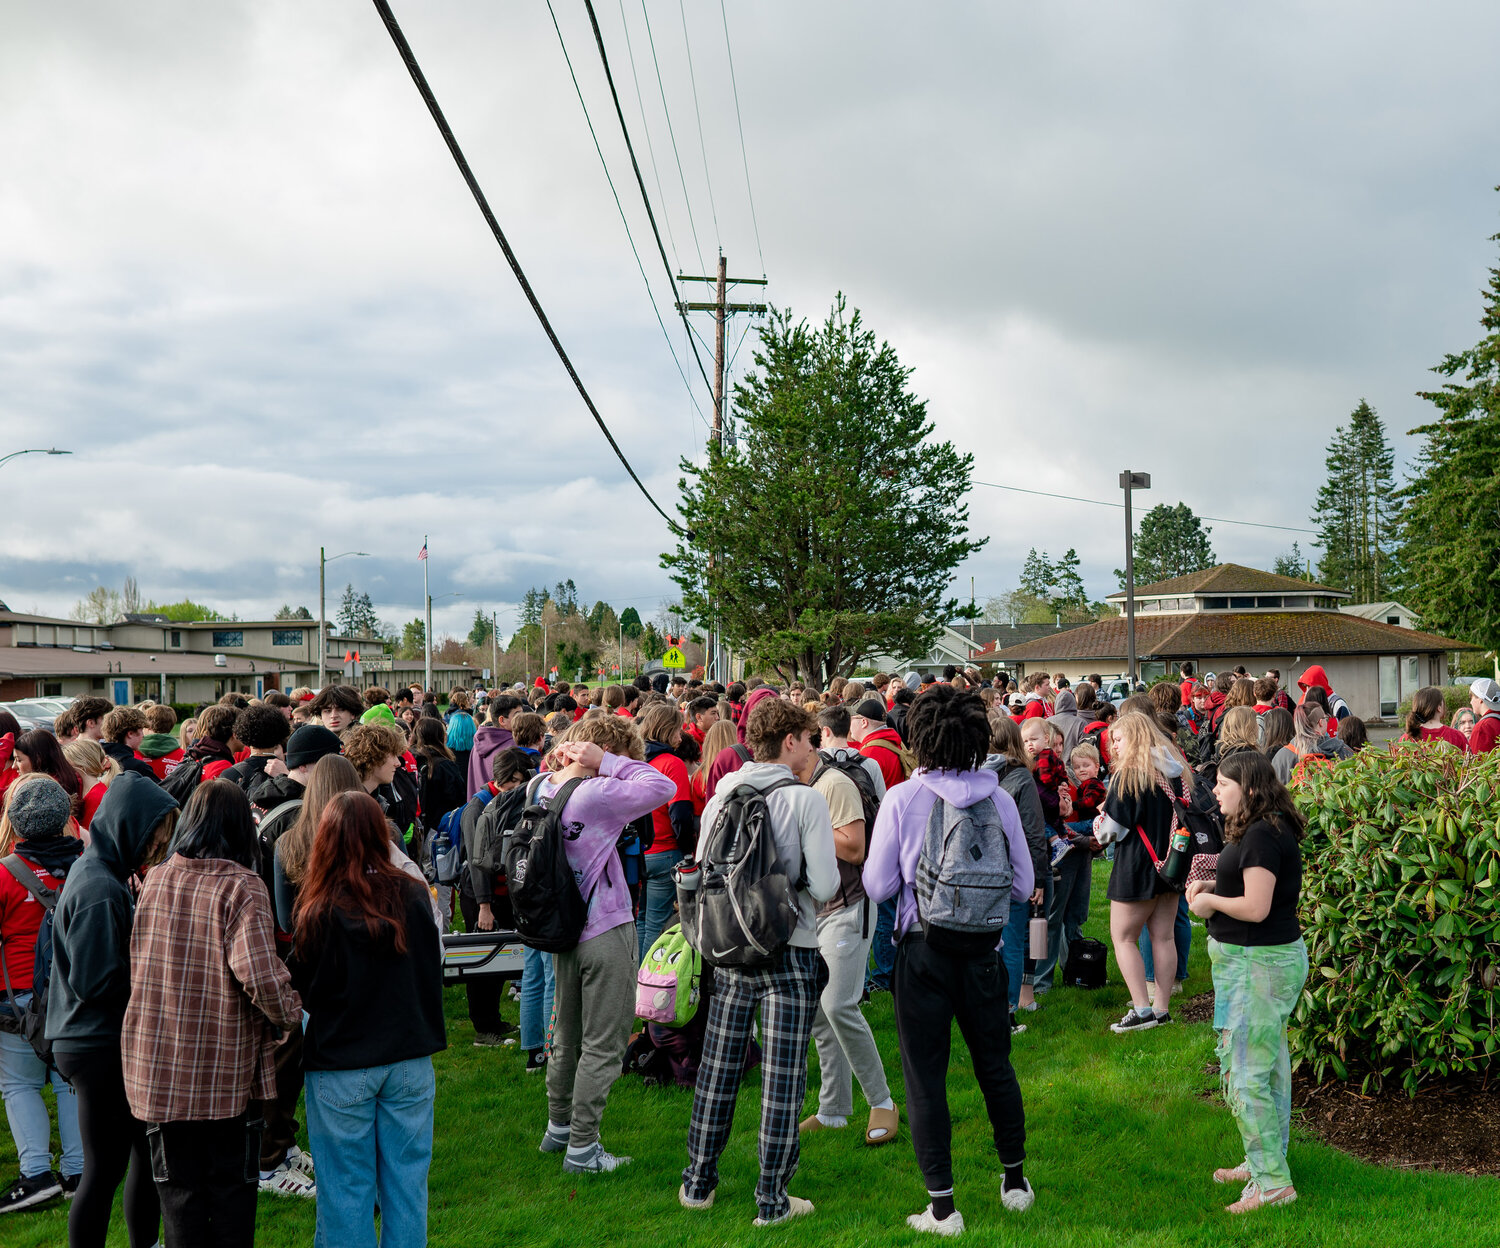 A crowd of students gathered in front of the Blaine school district office during an April 24 walkout to protest the district’s plans to cut about 65 part-time and full-time employees, including teachers, paraeducators, librarians and staff from administration, food service and transportation. The district says the reduced education plan, which the school board approved 4-0 with one abstention, is mainly due to a smaller-than-projected student enrollment and decreased government funding.